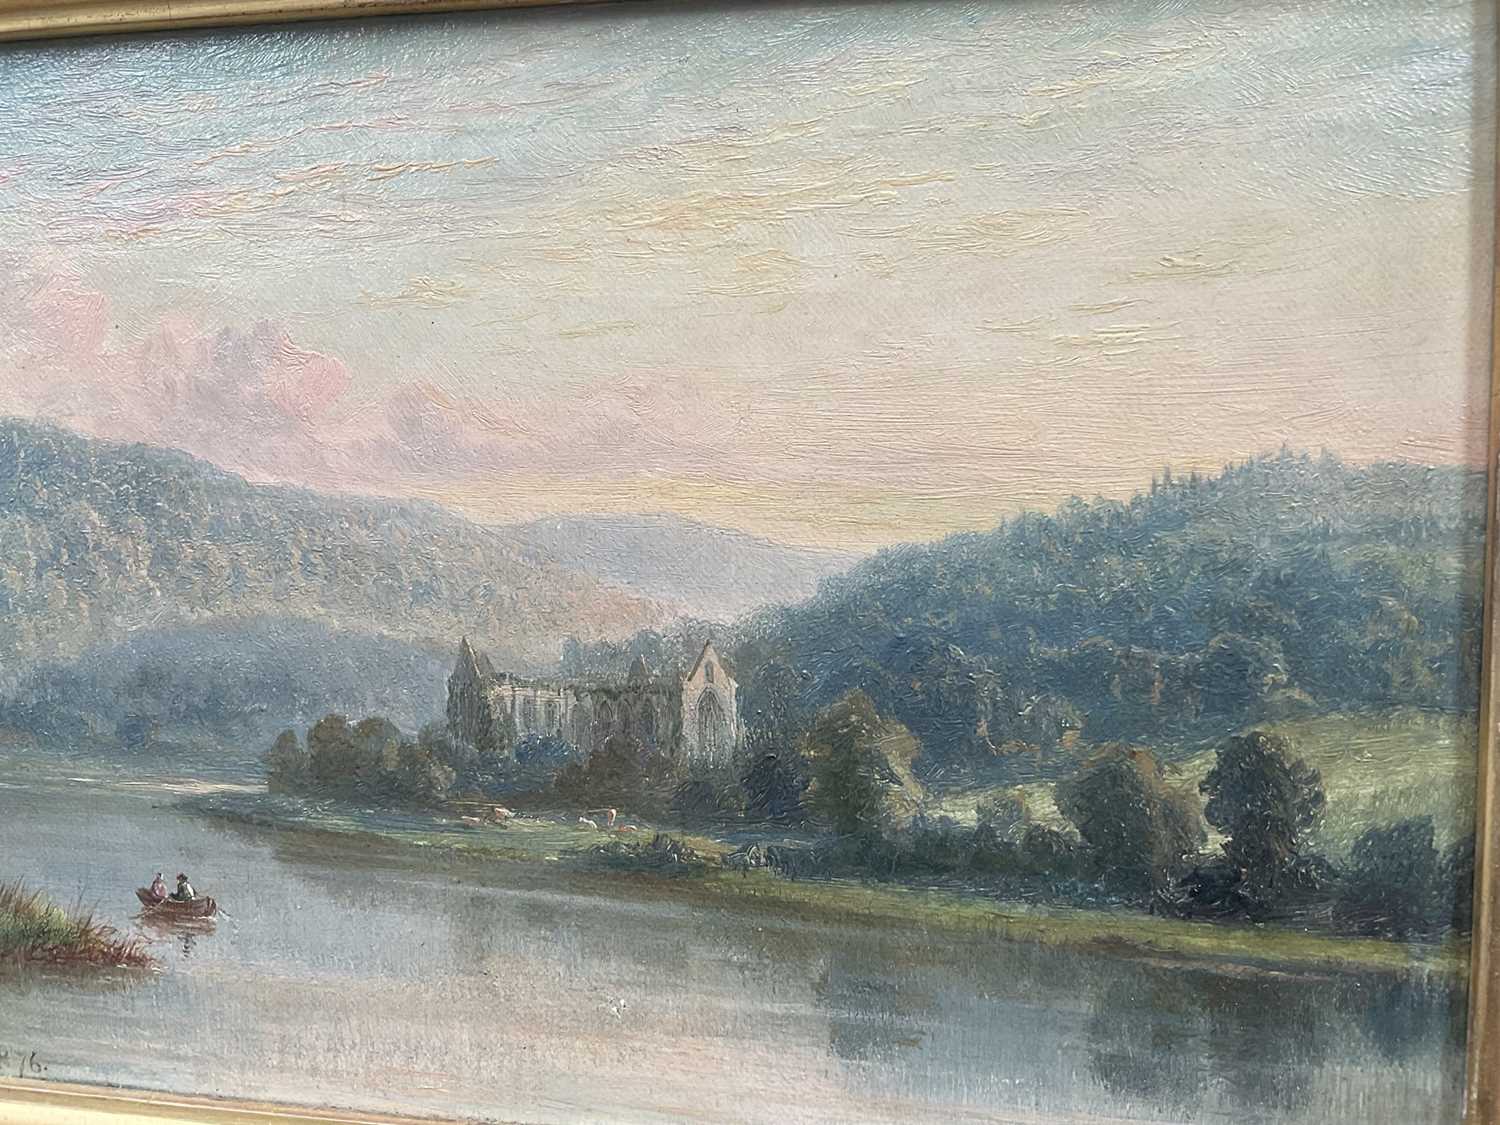 Albert Gyngell, On the Wye, Tintern Abbey, oil on canvas, signed and dated 1876, mounted in gilt fra - Image 4 of 6